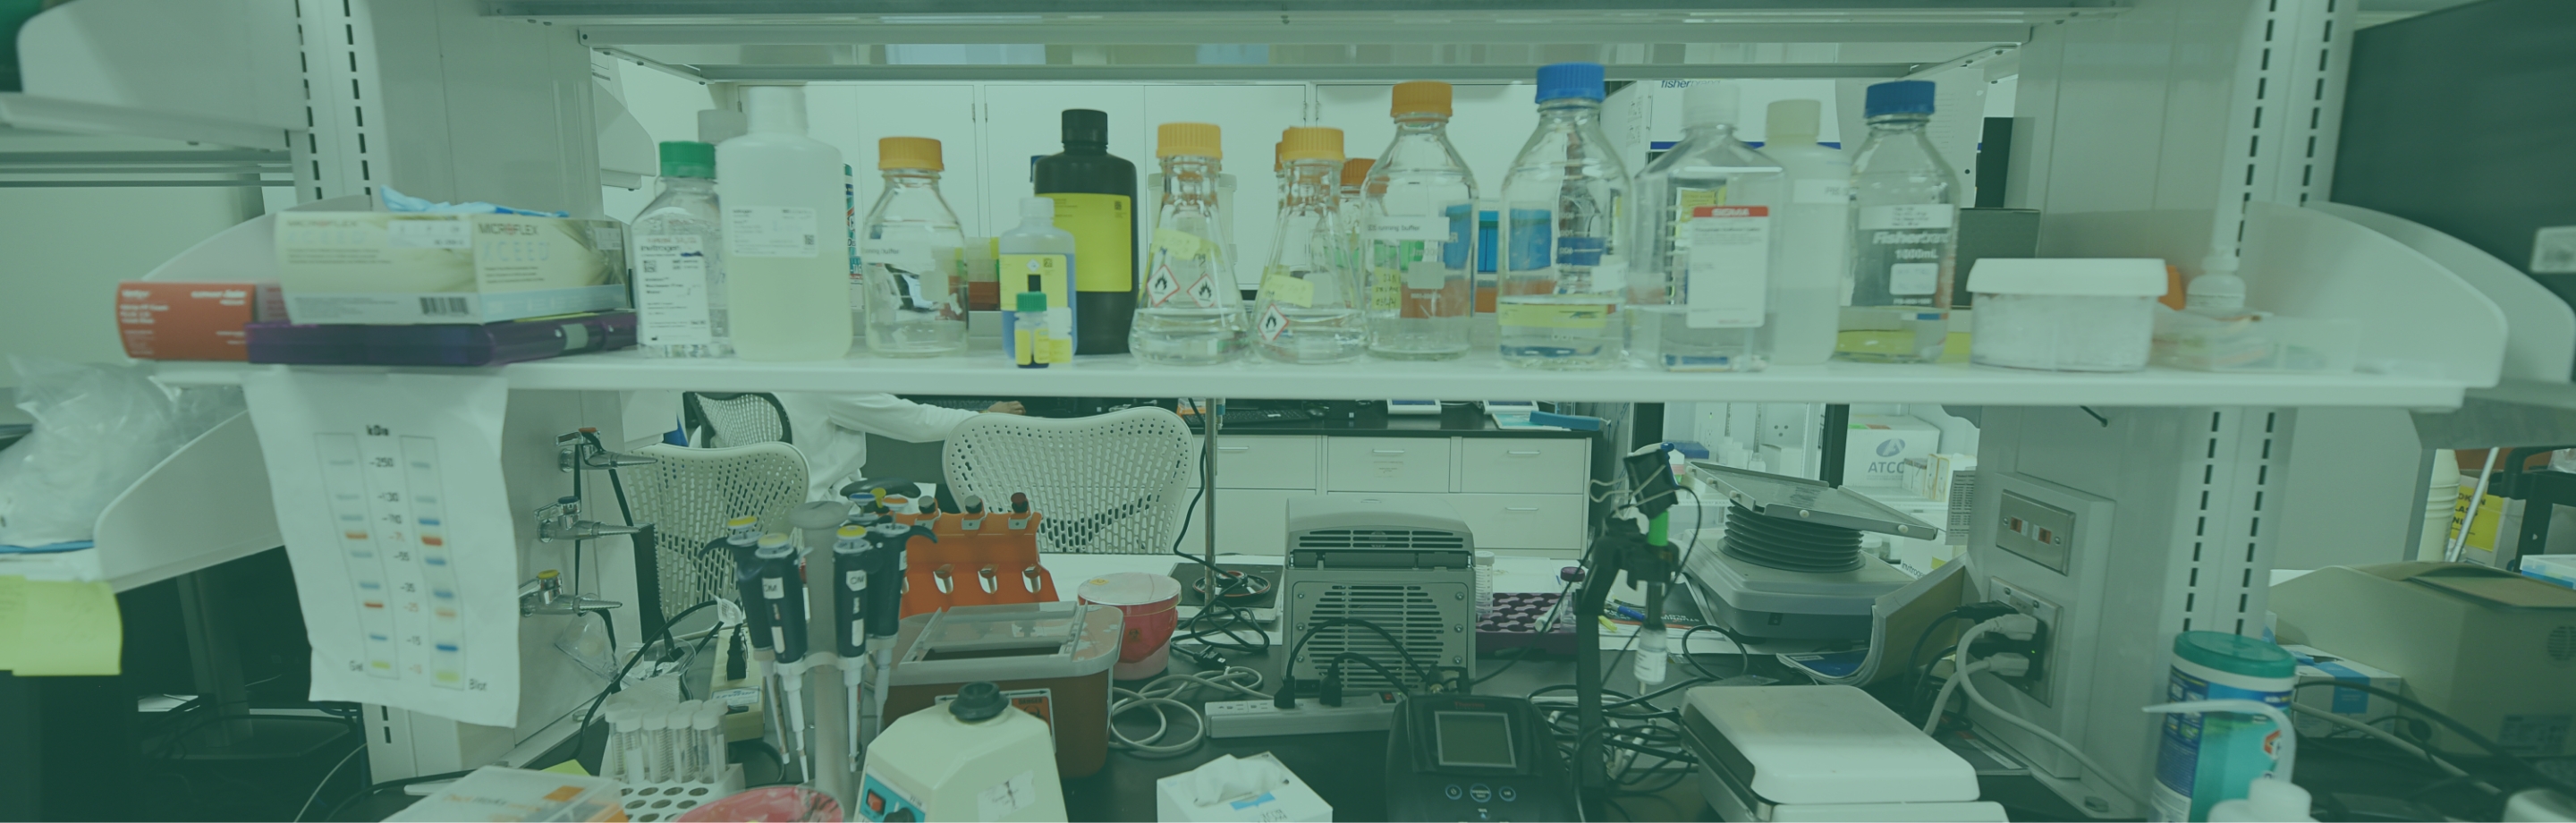 lab work area with several different kinds of equipment